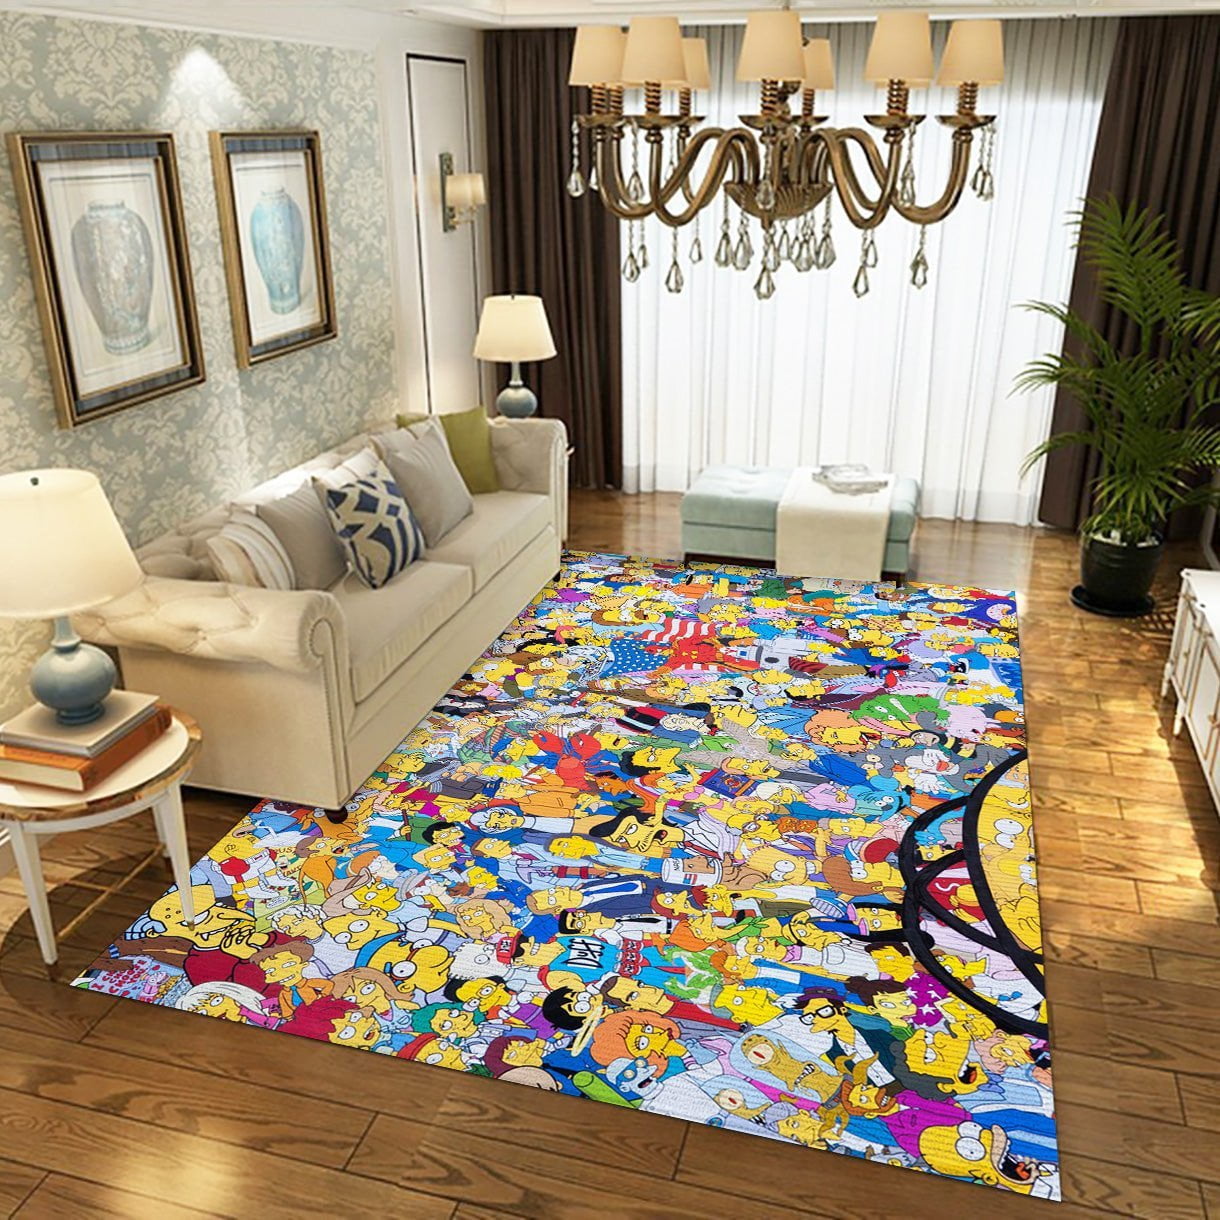 The Simpsons Area Rug For Christmas, Living Room And Bedroom Rug – Floor Decor – Indoor Outdoor Rugs 